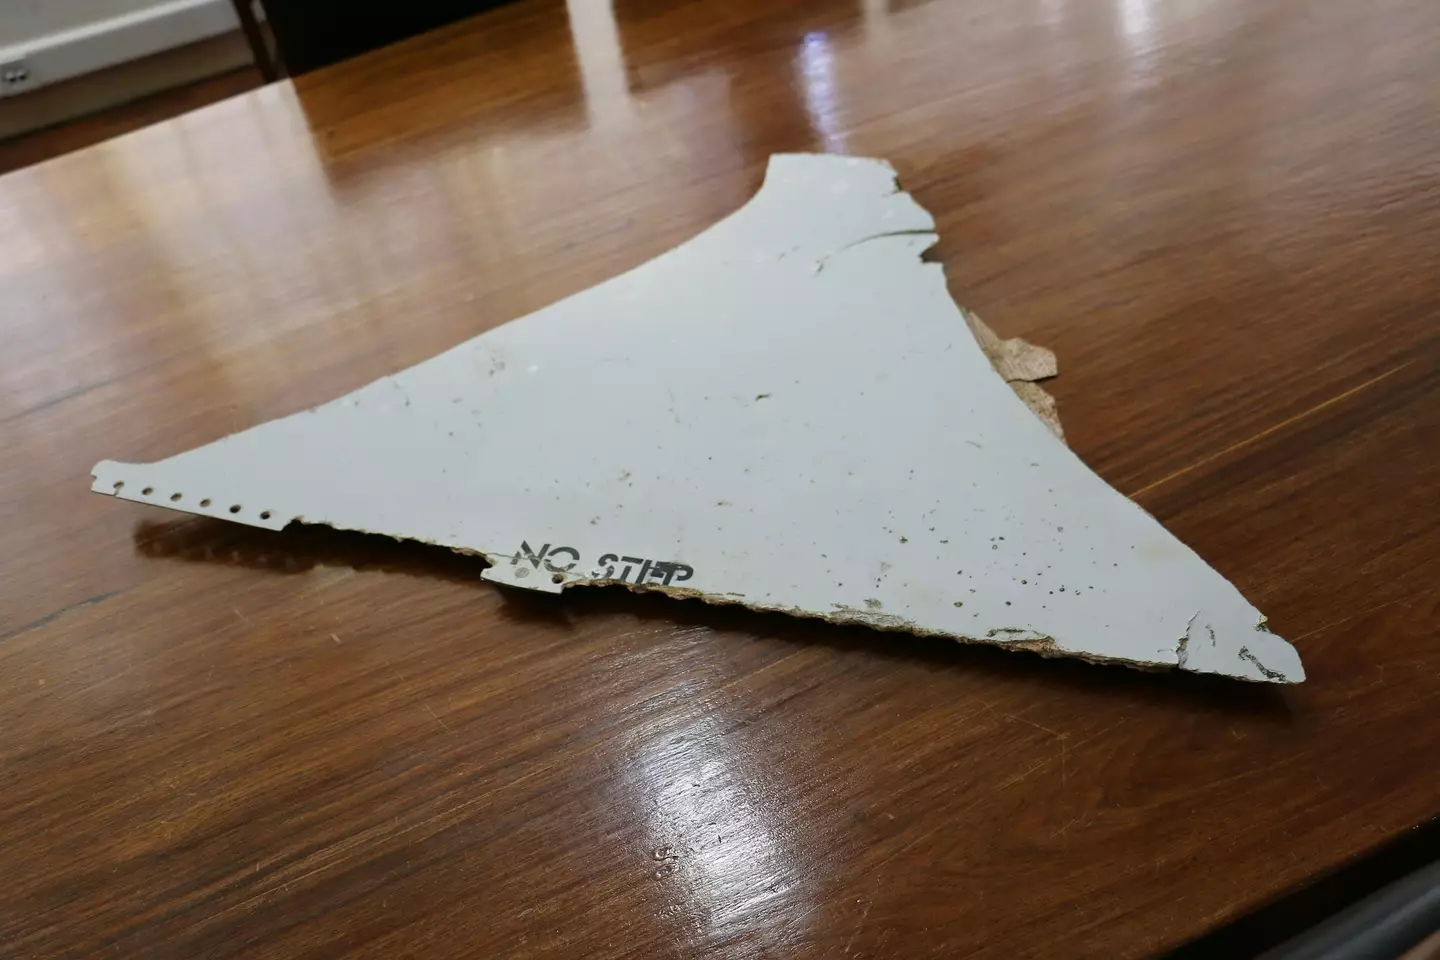 Several pieces of debris believed to be part of MH370 have washed up in the years since the plane went missing.